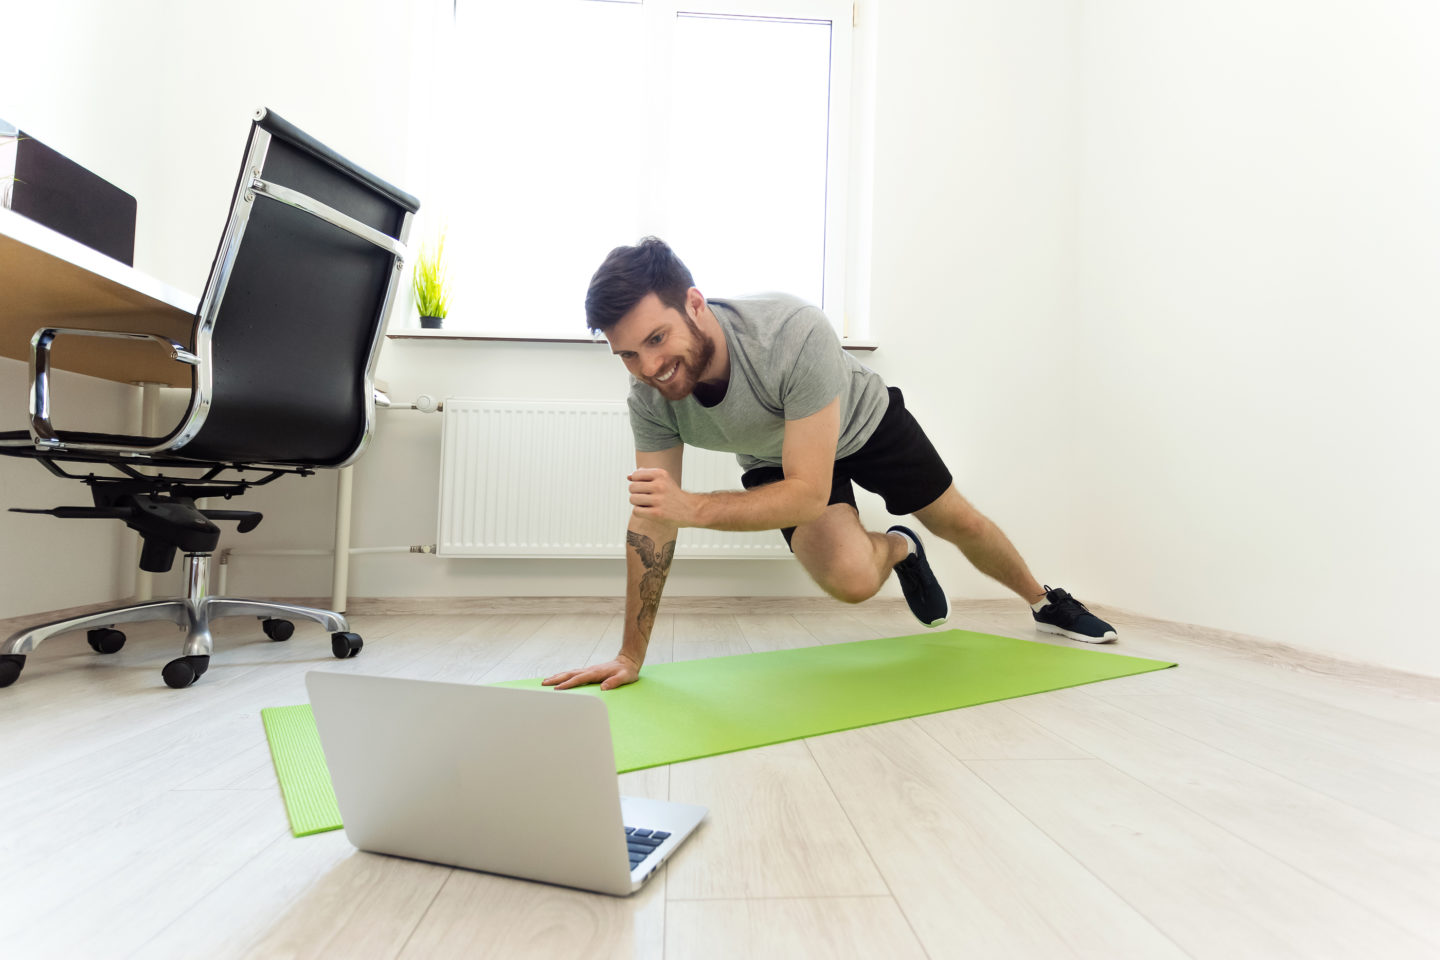 Man Doing Exercises at Home with Online Tutorial. Man Watching Laptop Doing Sports. Video Call Practice. Online Training on Quarantine at Home. Home Sport, Healthy Life, Quarantine Concept